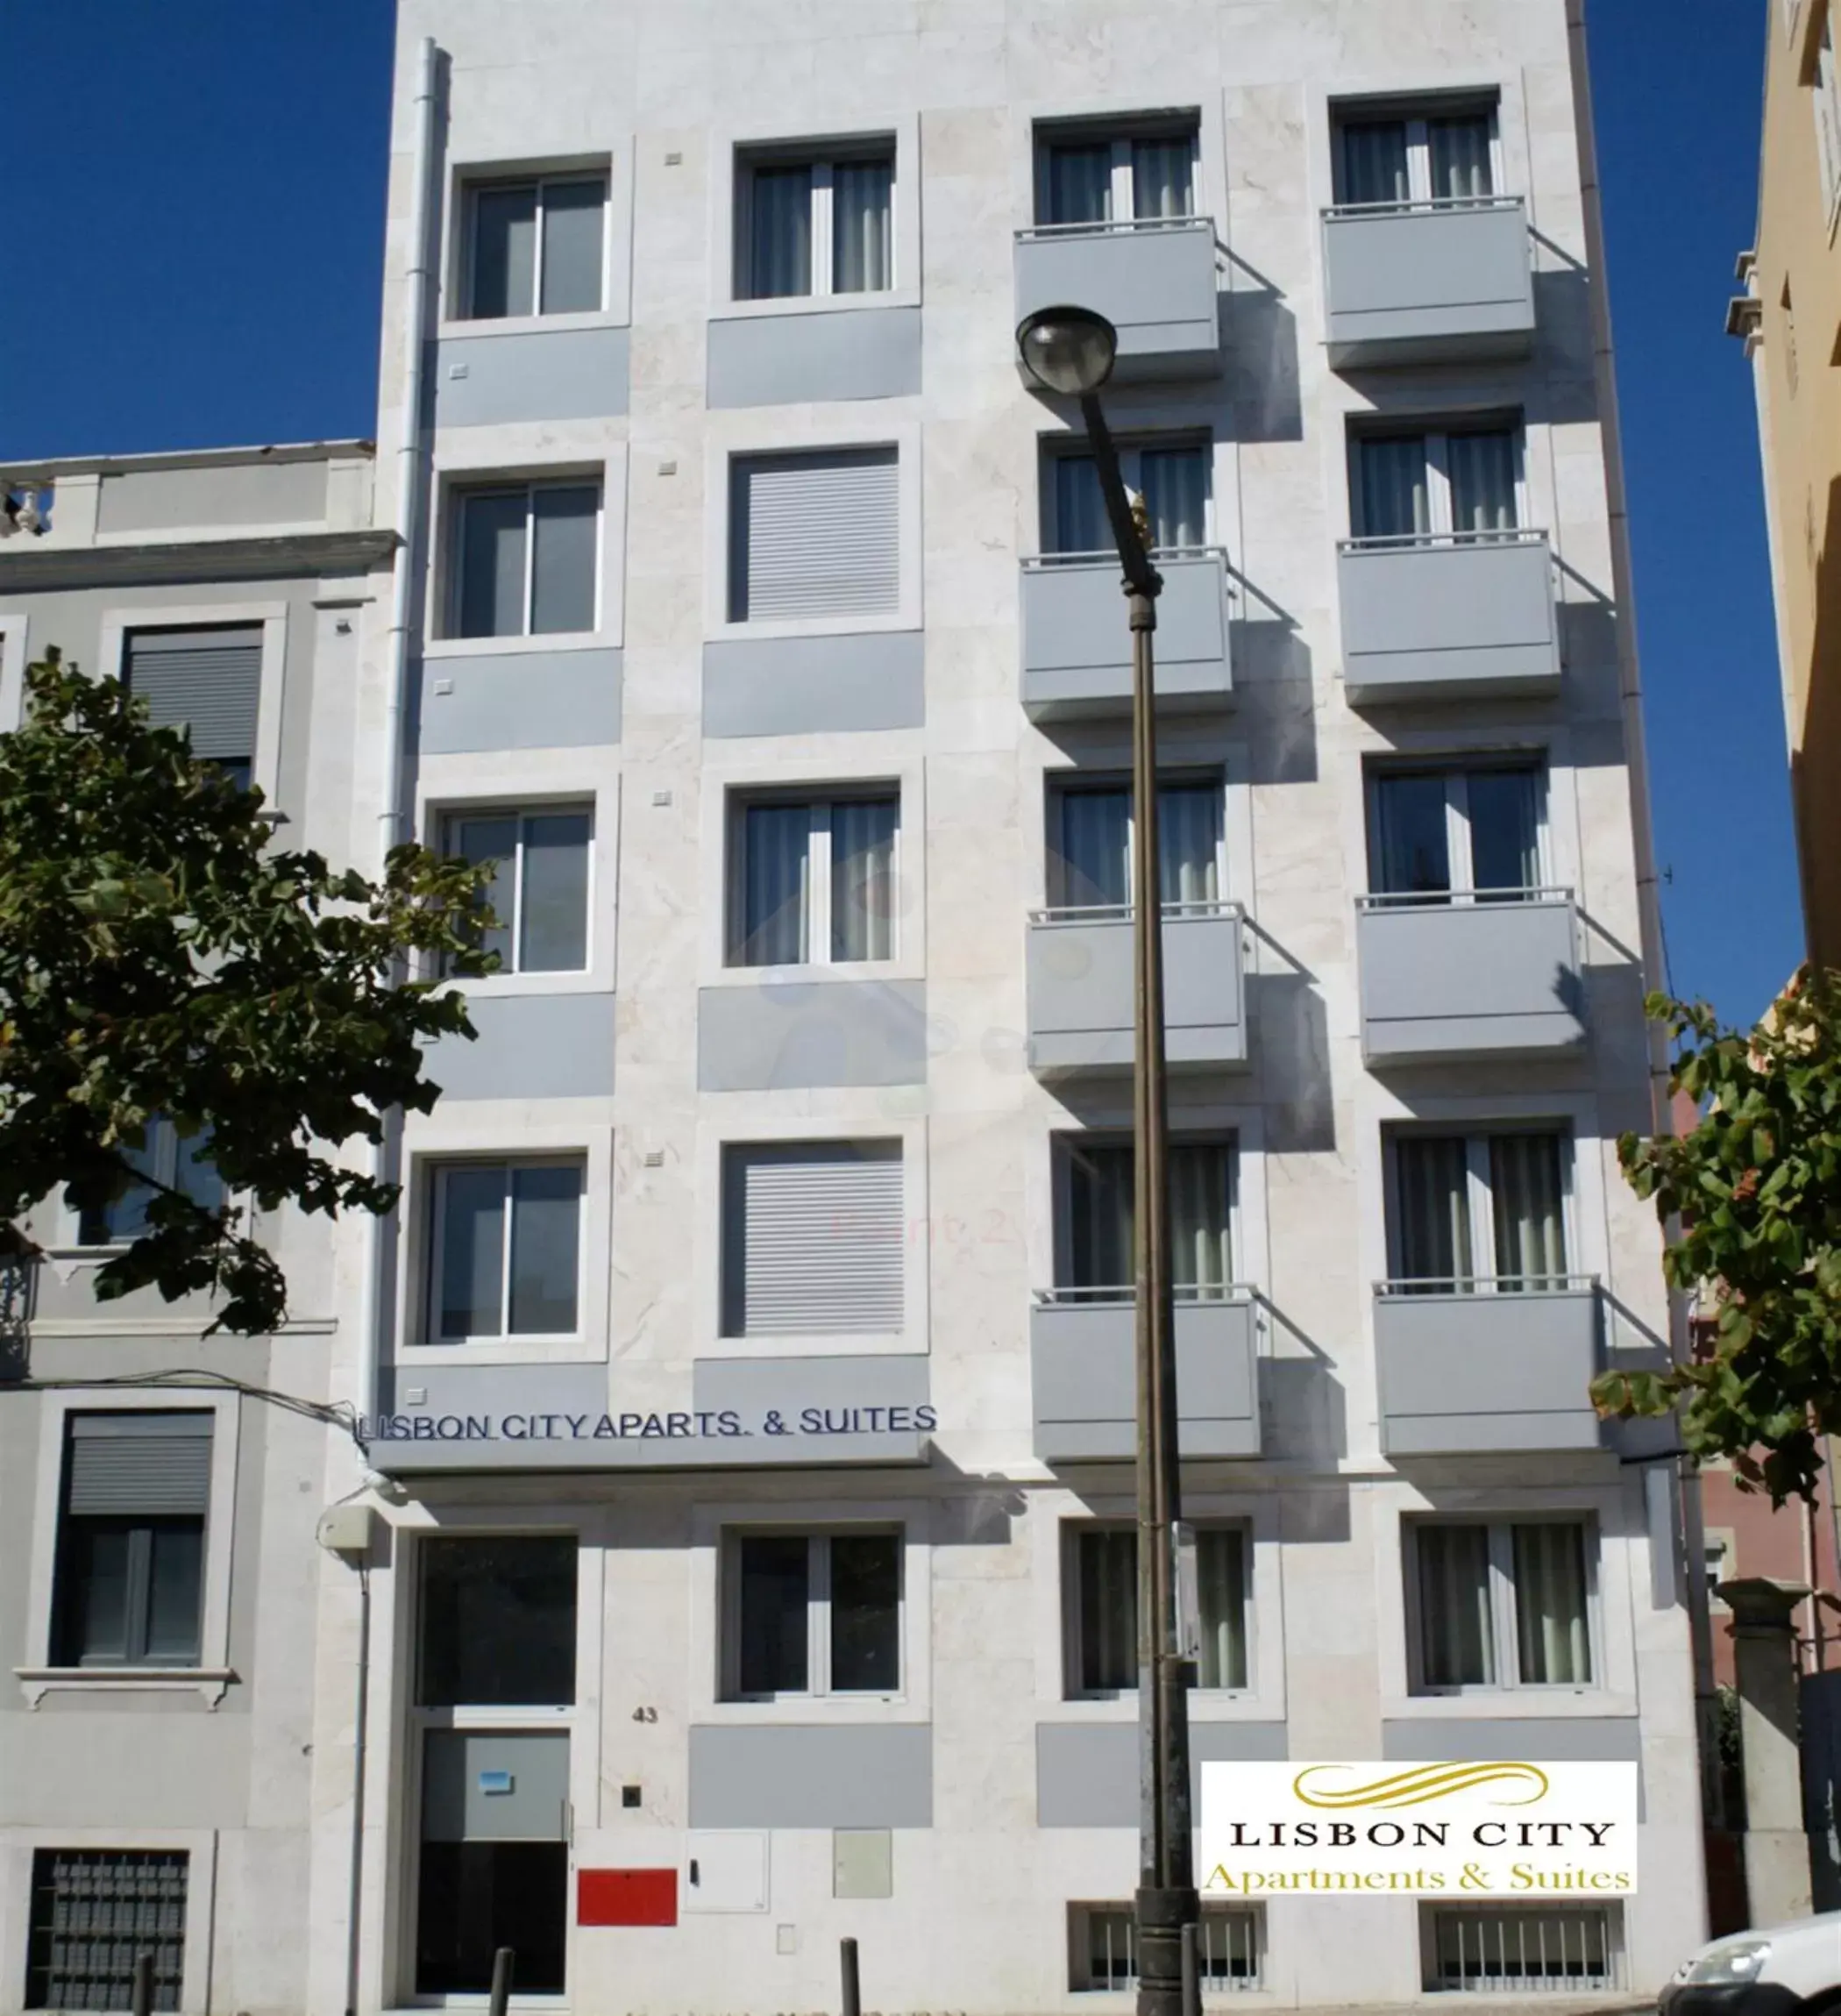 Property building, Facade/Entrance in Lisbon City Apartments & Suites by City Hotels